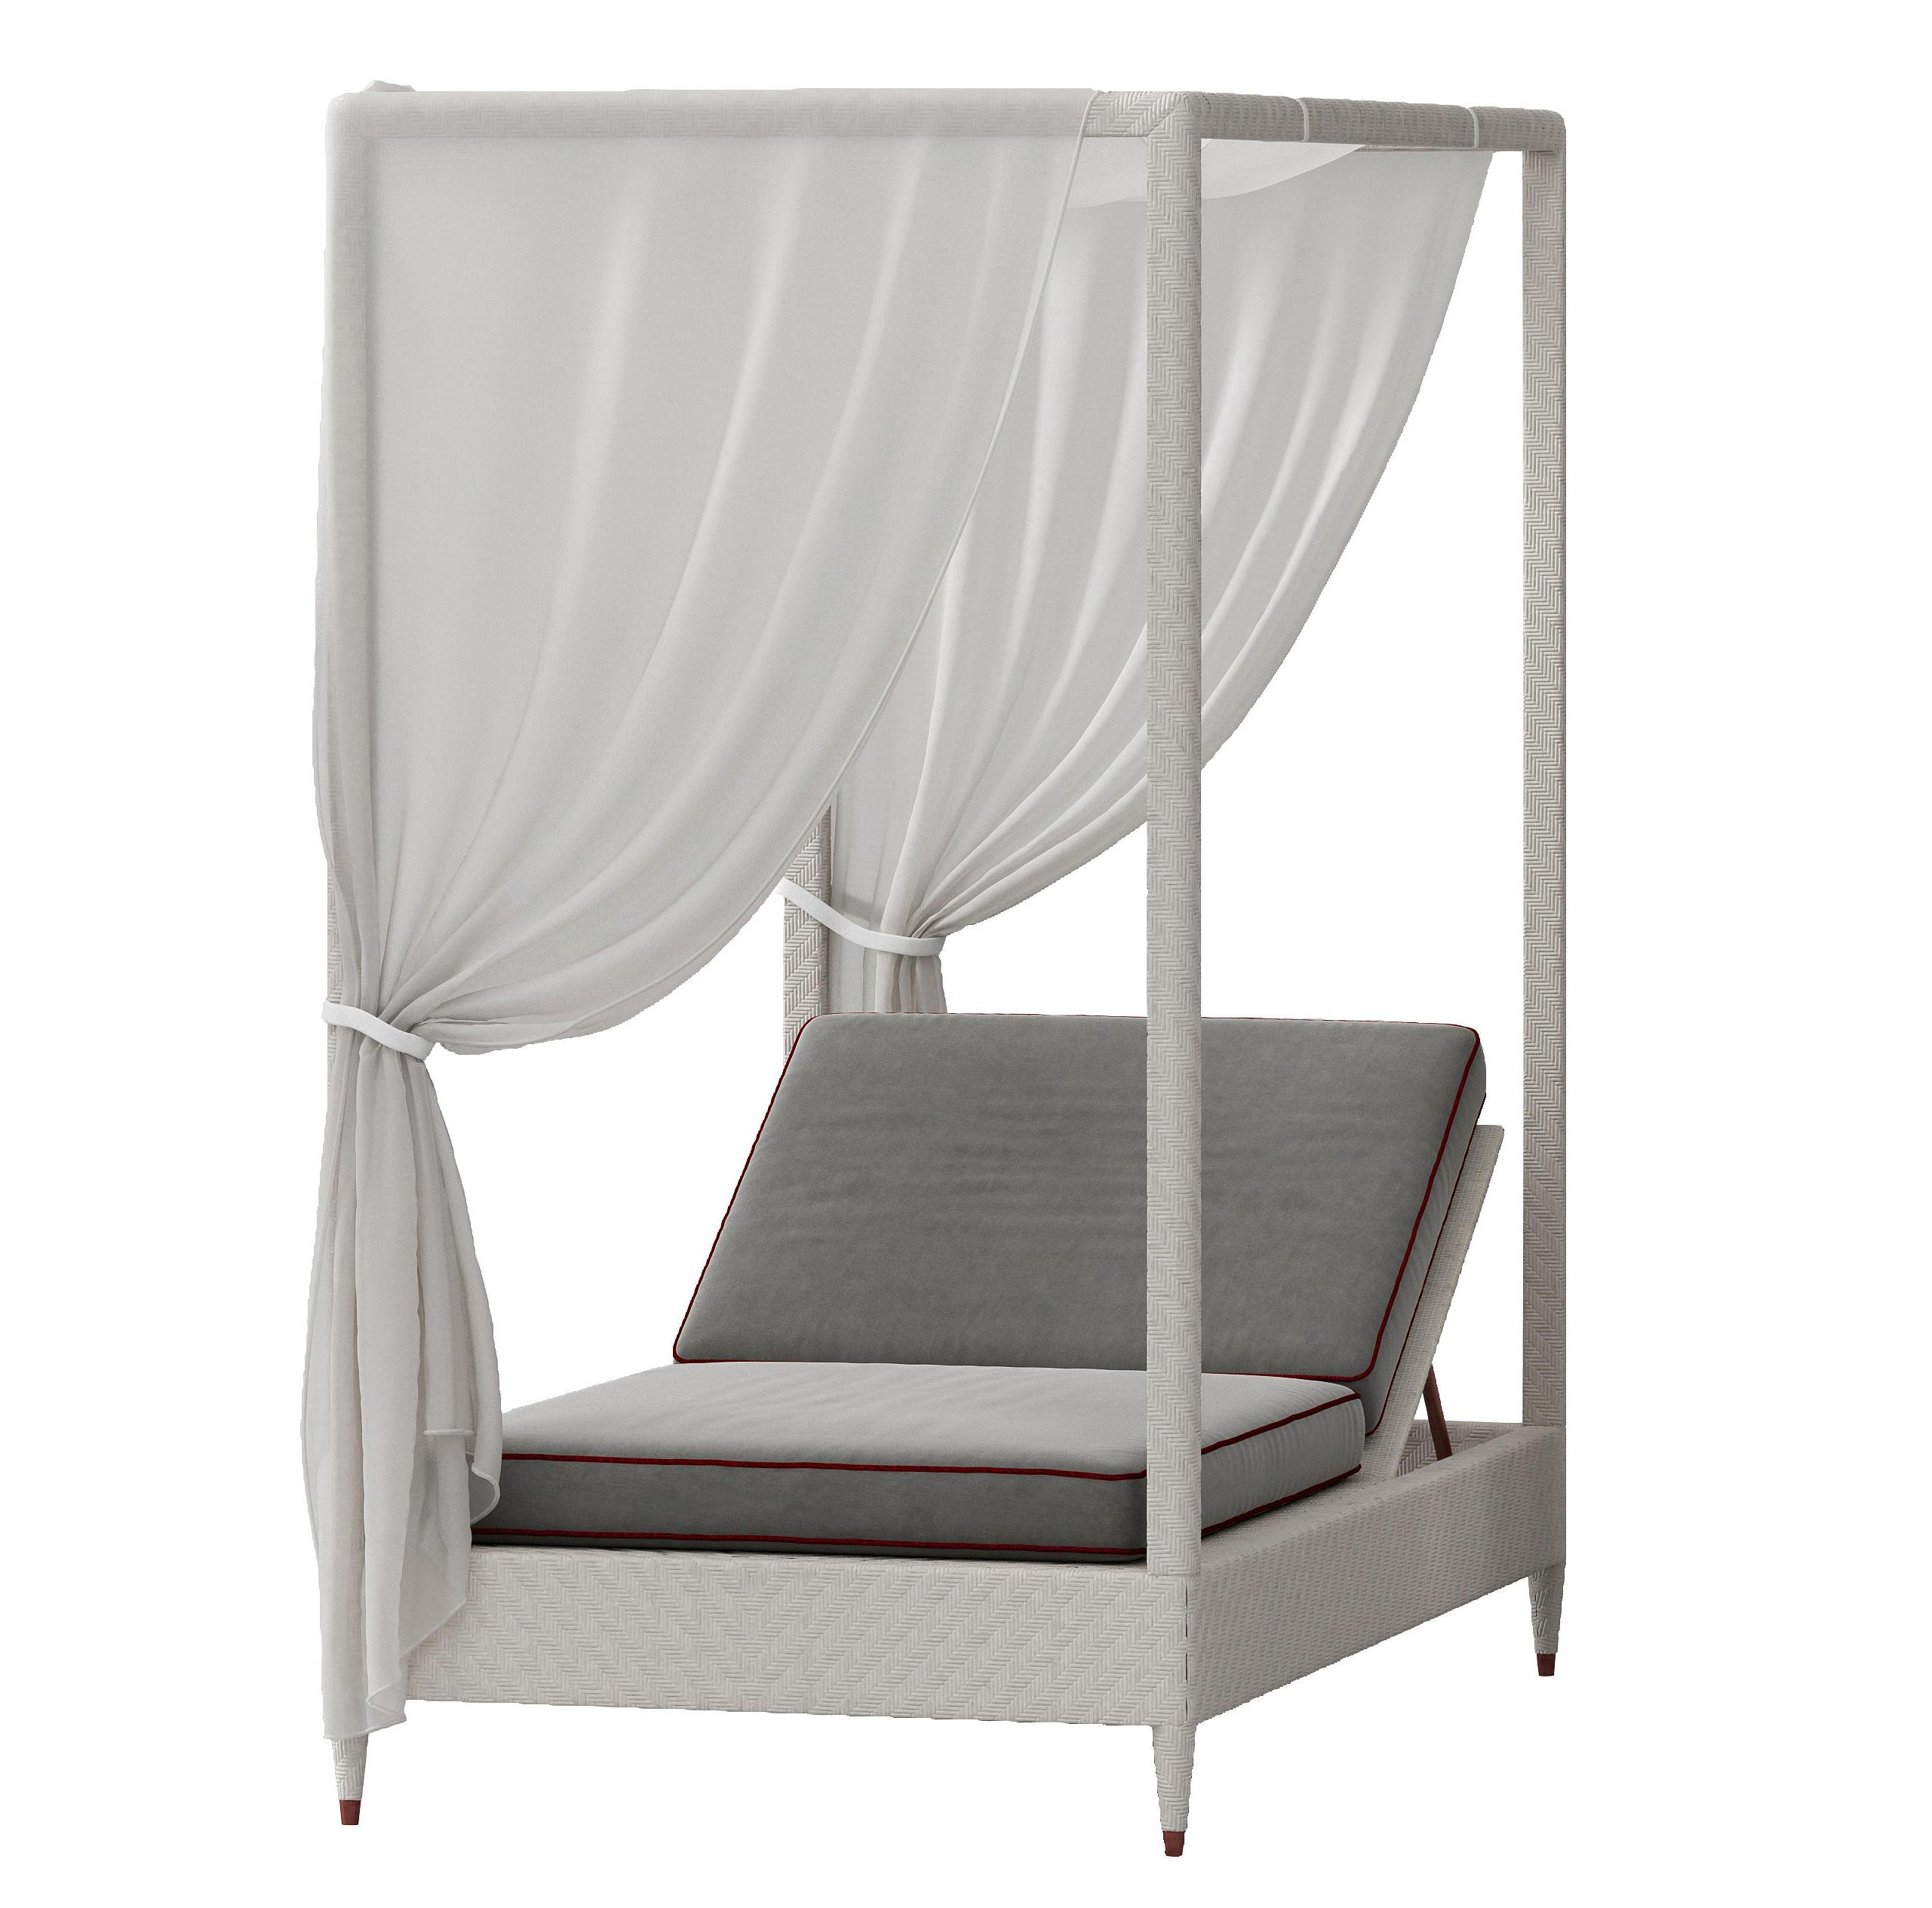 Premium One-Seater Daybed with Canopy